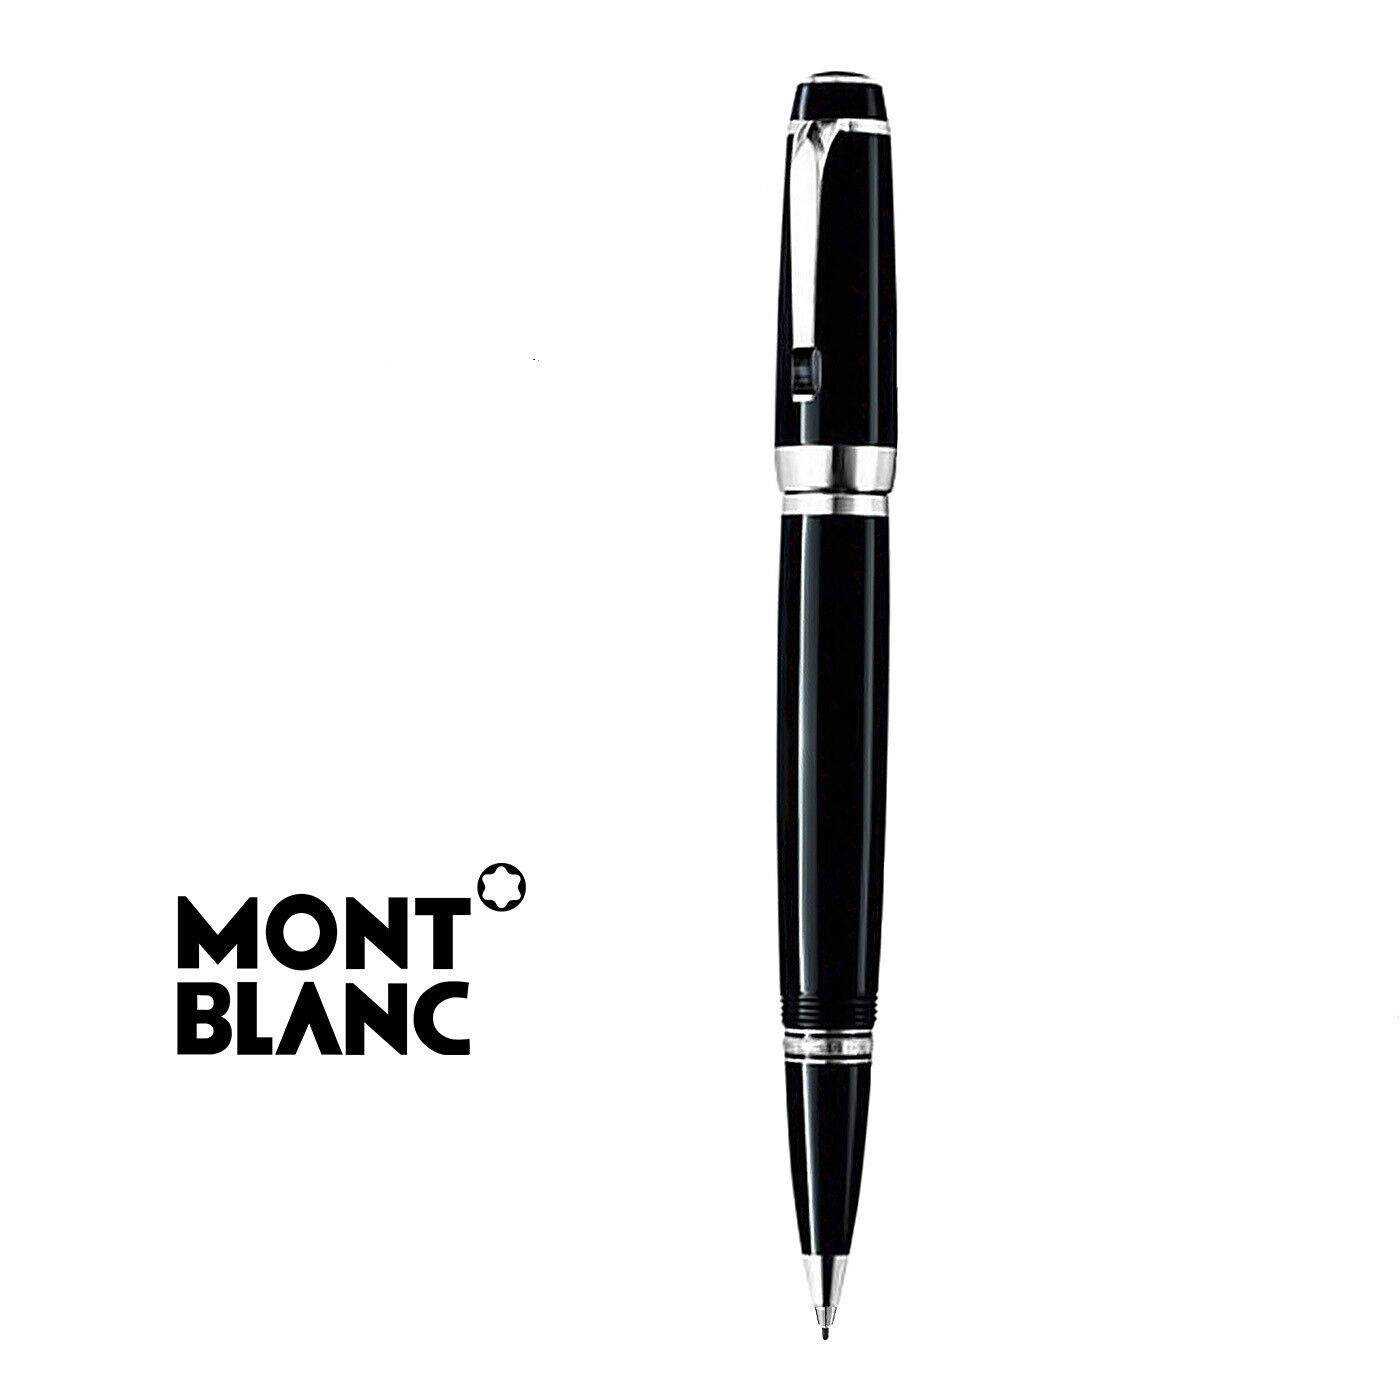  New Authentic Montblanc Boheme Synthetic Noir Stone Rollerball Pen Bestsellers